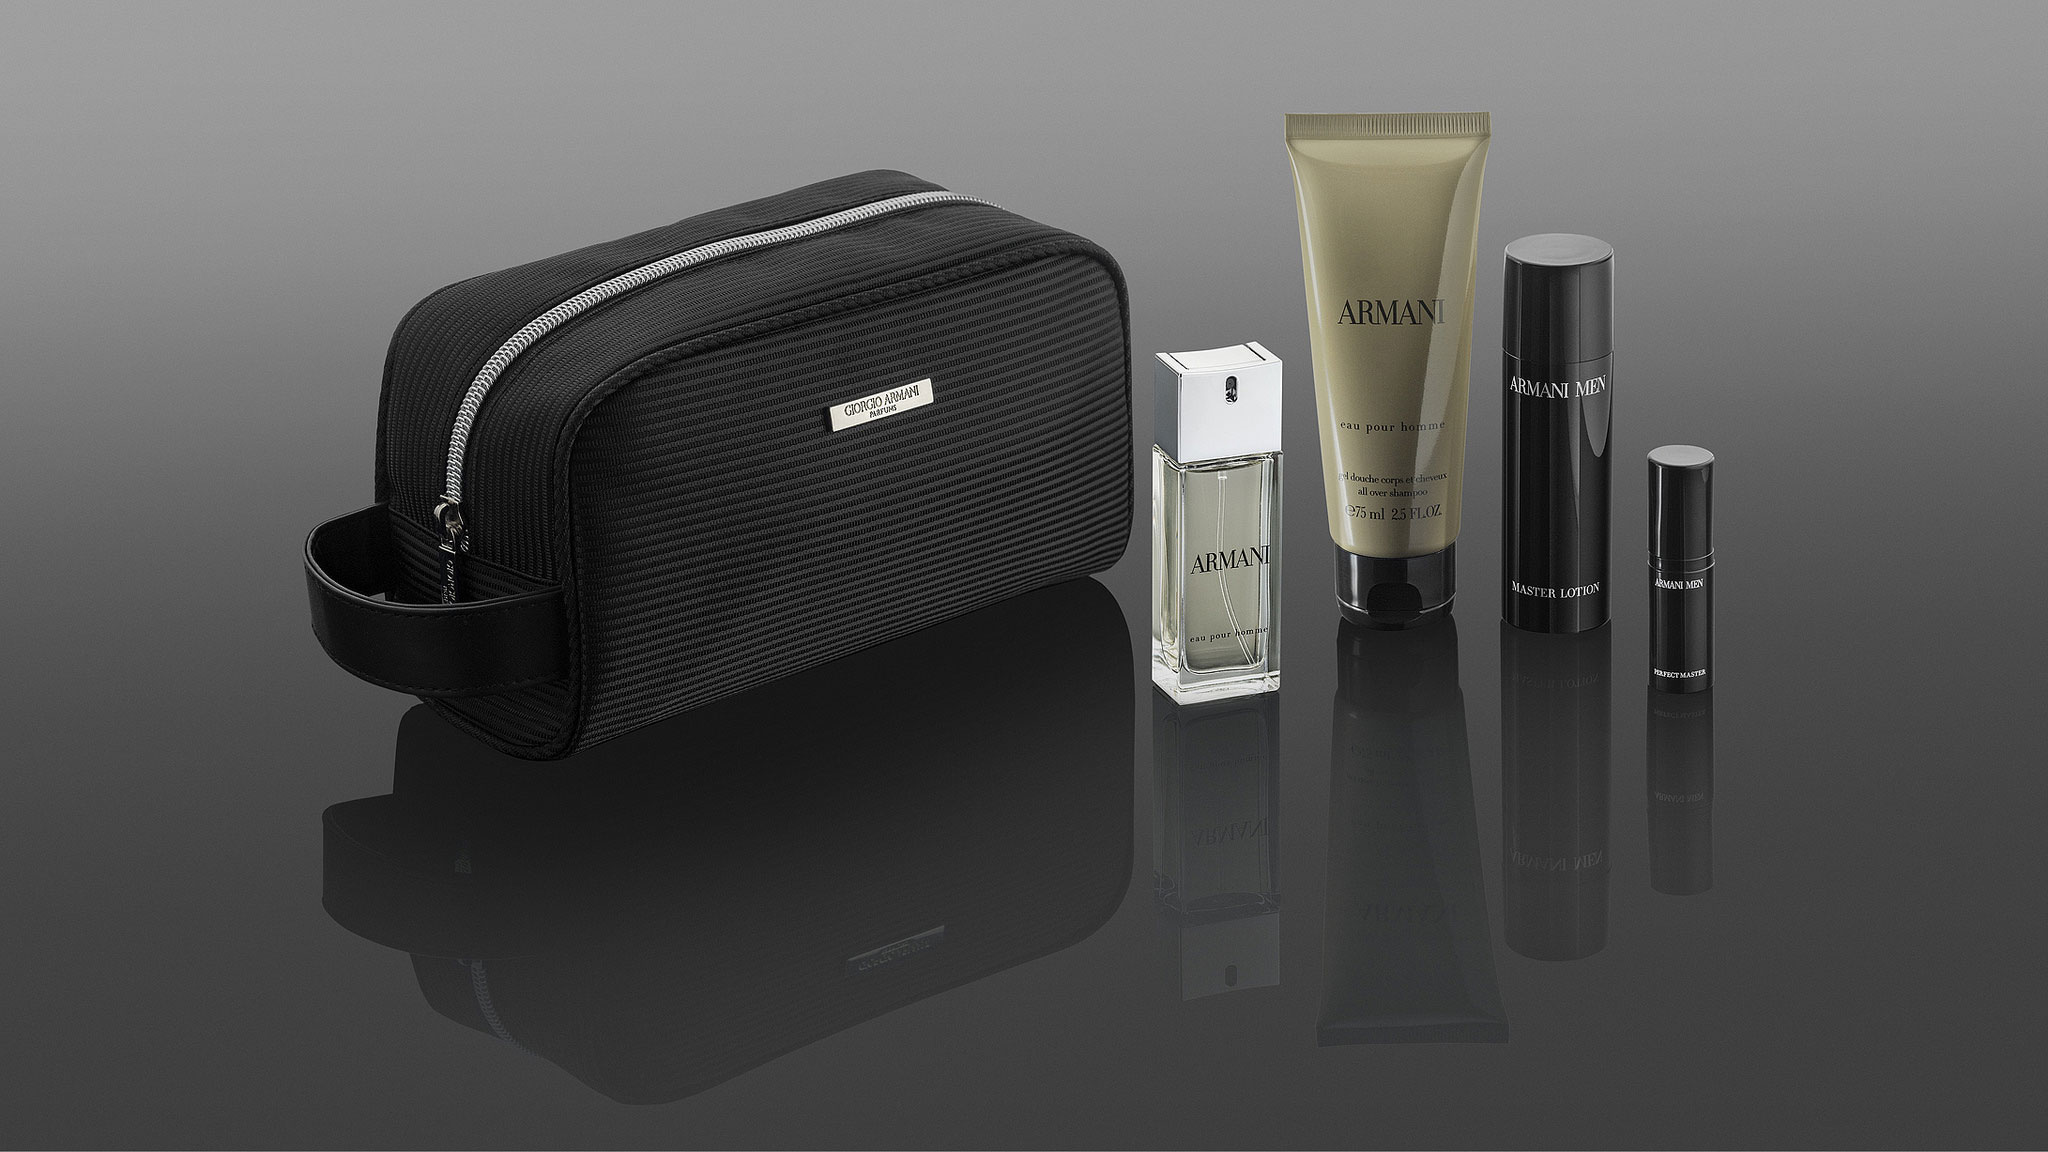 Qatar Airways launches new first class amenity kits – Business Traveller